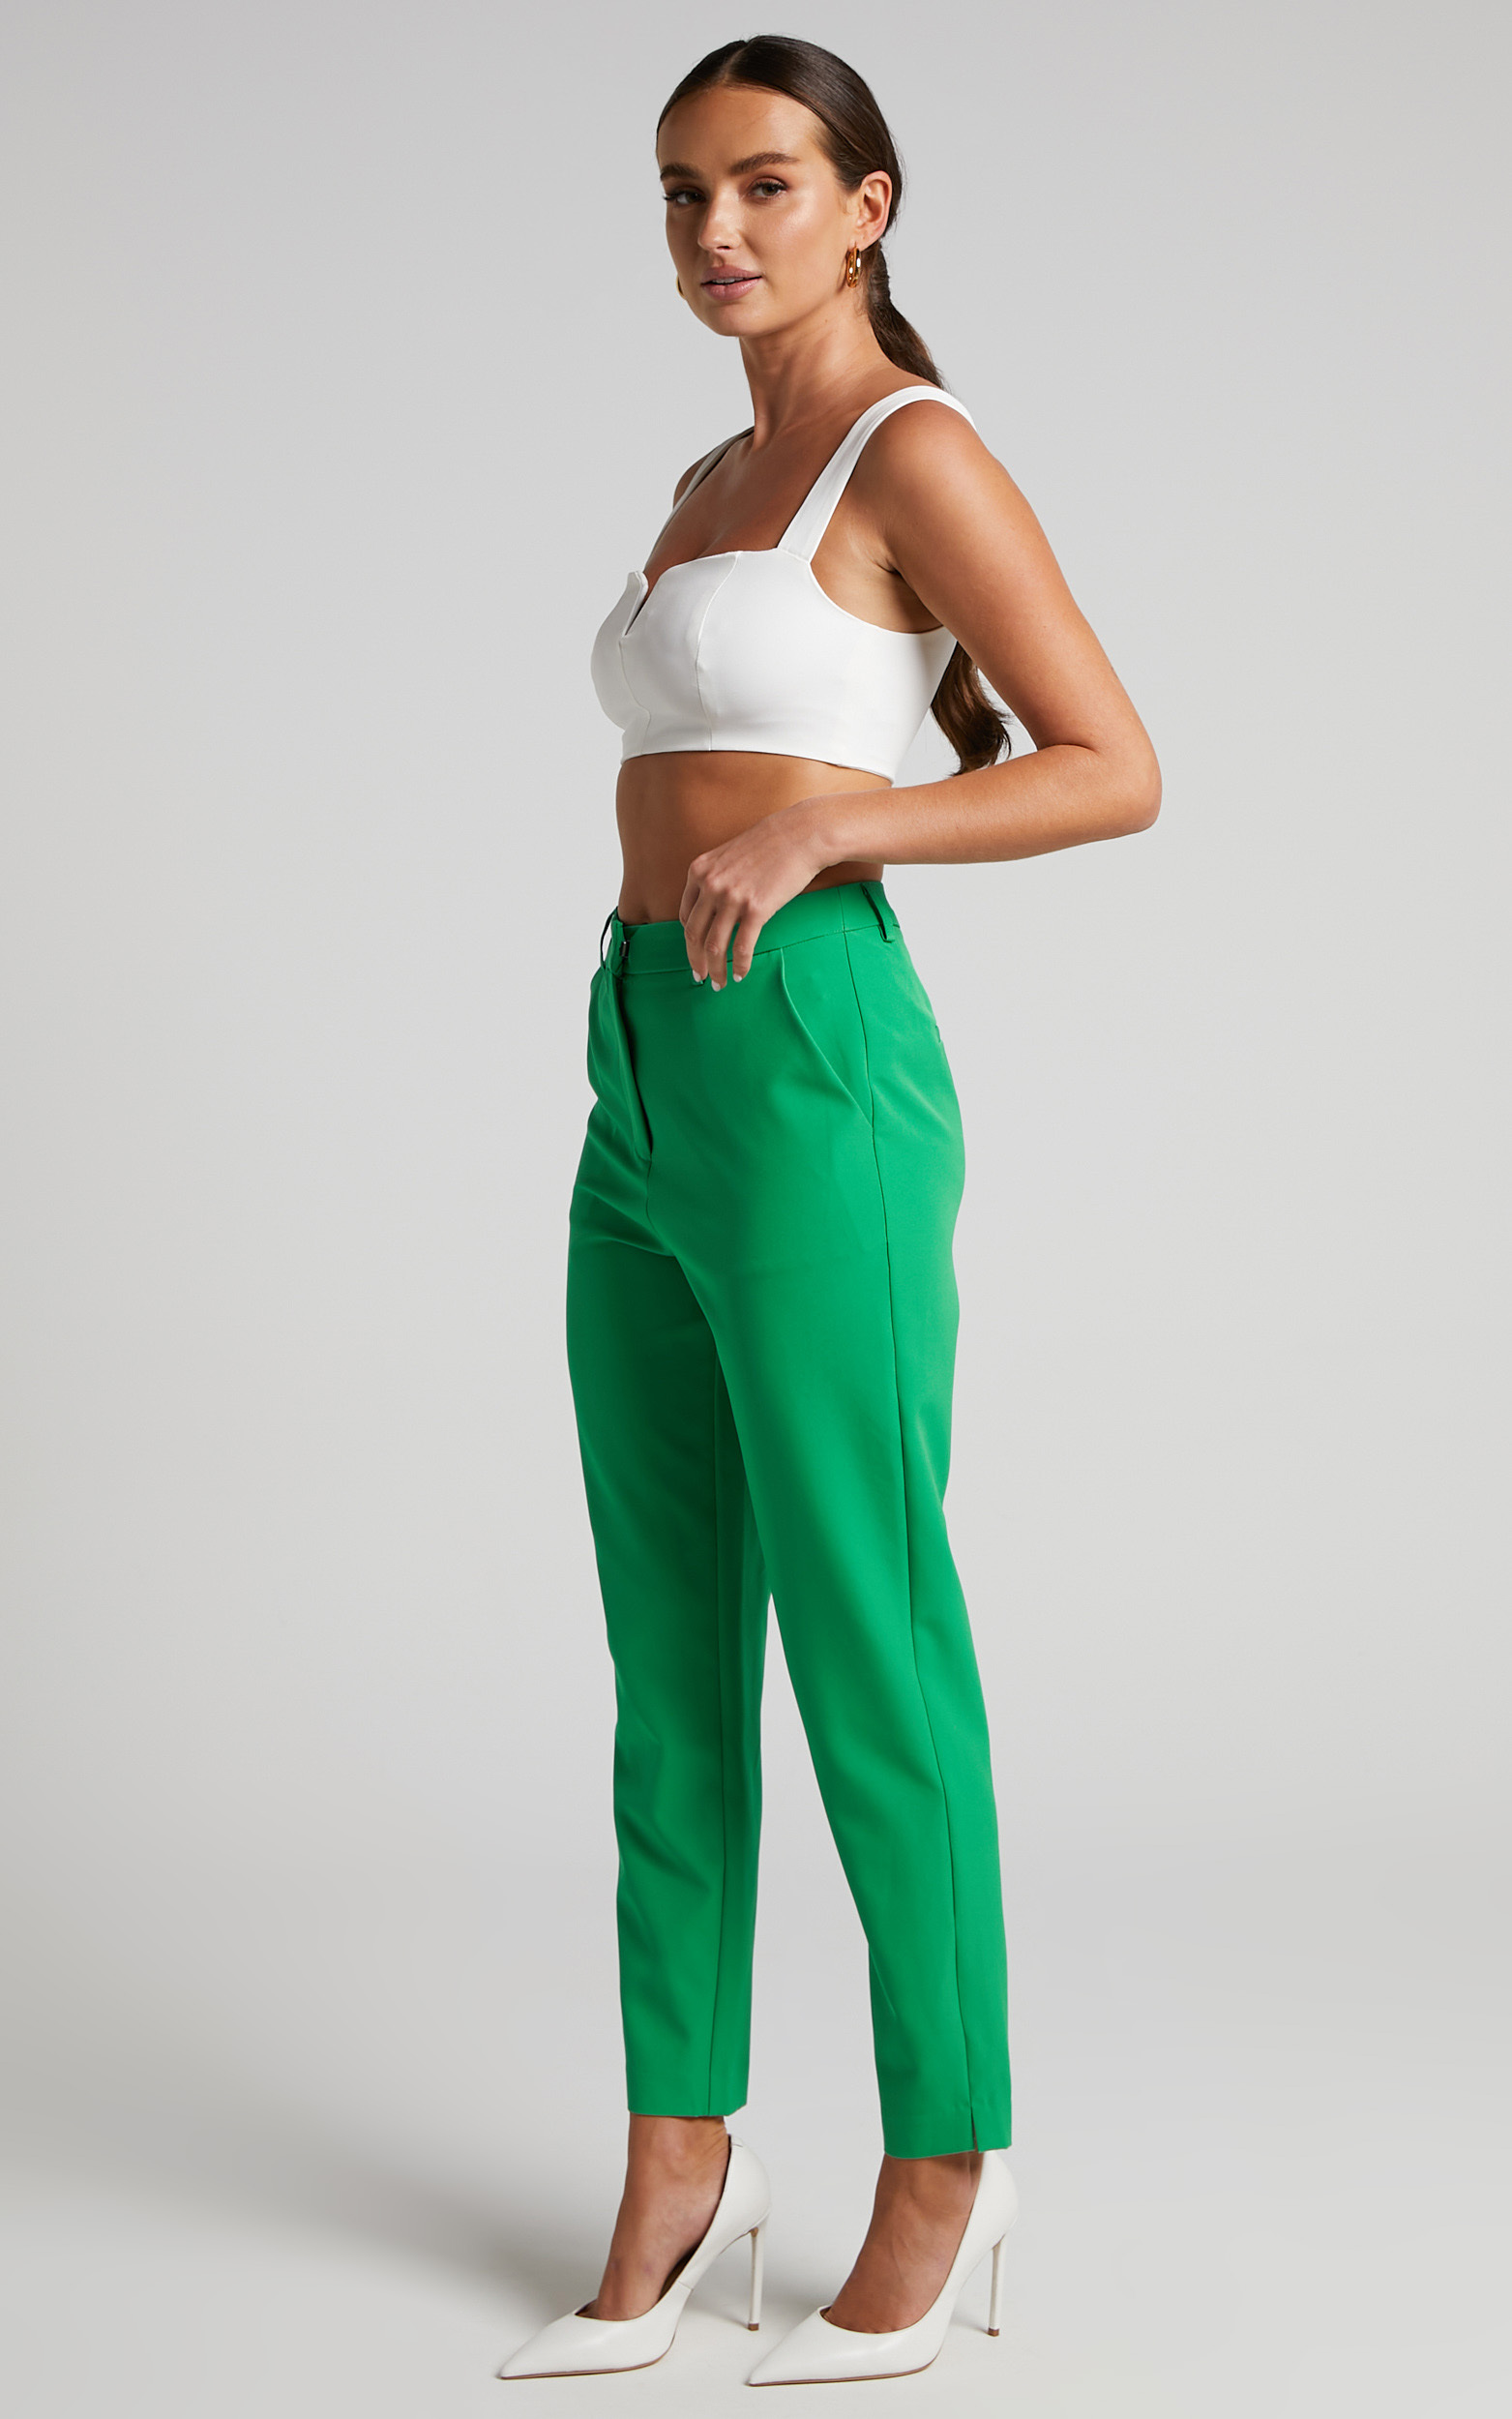 Hermie Pants - Cropped Tailored Pants in Green - 04, GRN1, hi-res image number null